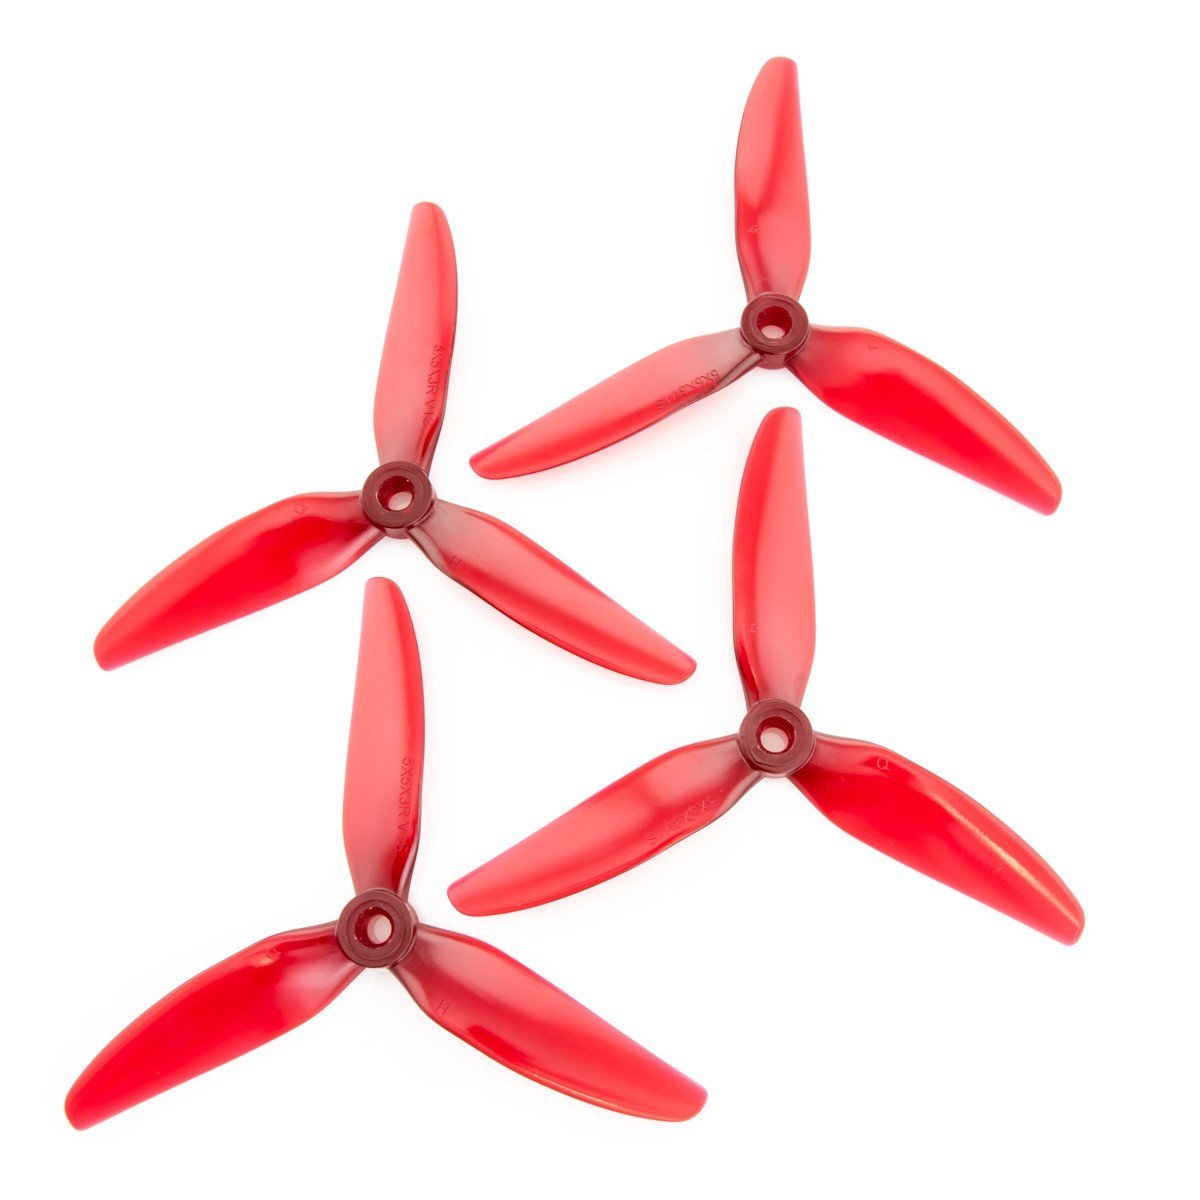 HQ Durable Prop 5.1x4.6x3V1S Tri Blade POPO Propellers CW/CCW 1 Pack (4 Pieces) - Phaser FPV